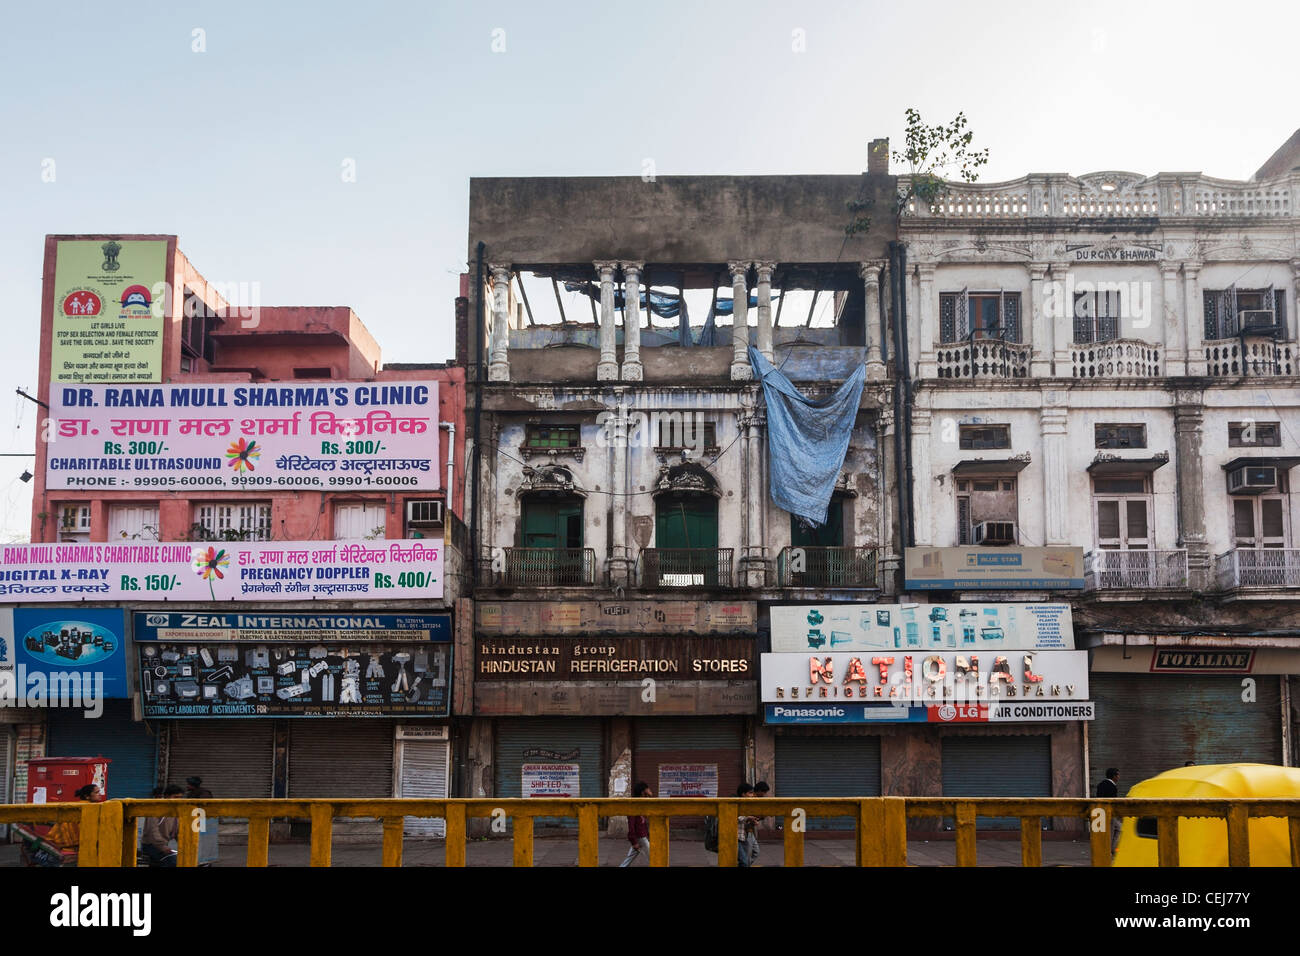 Indian third world urban lifestyle: Street life and view of old, dilapidated apartment and shop buildings in Old Delhi, India Stock Photo